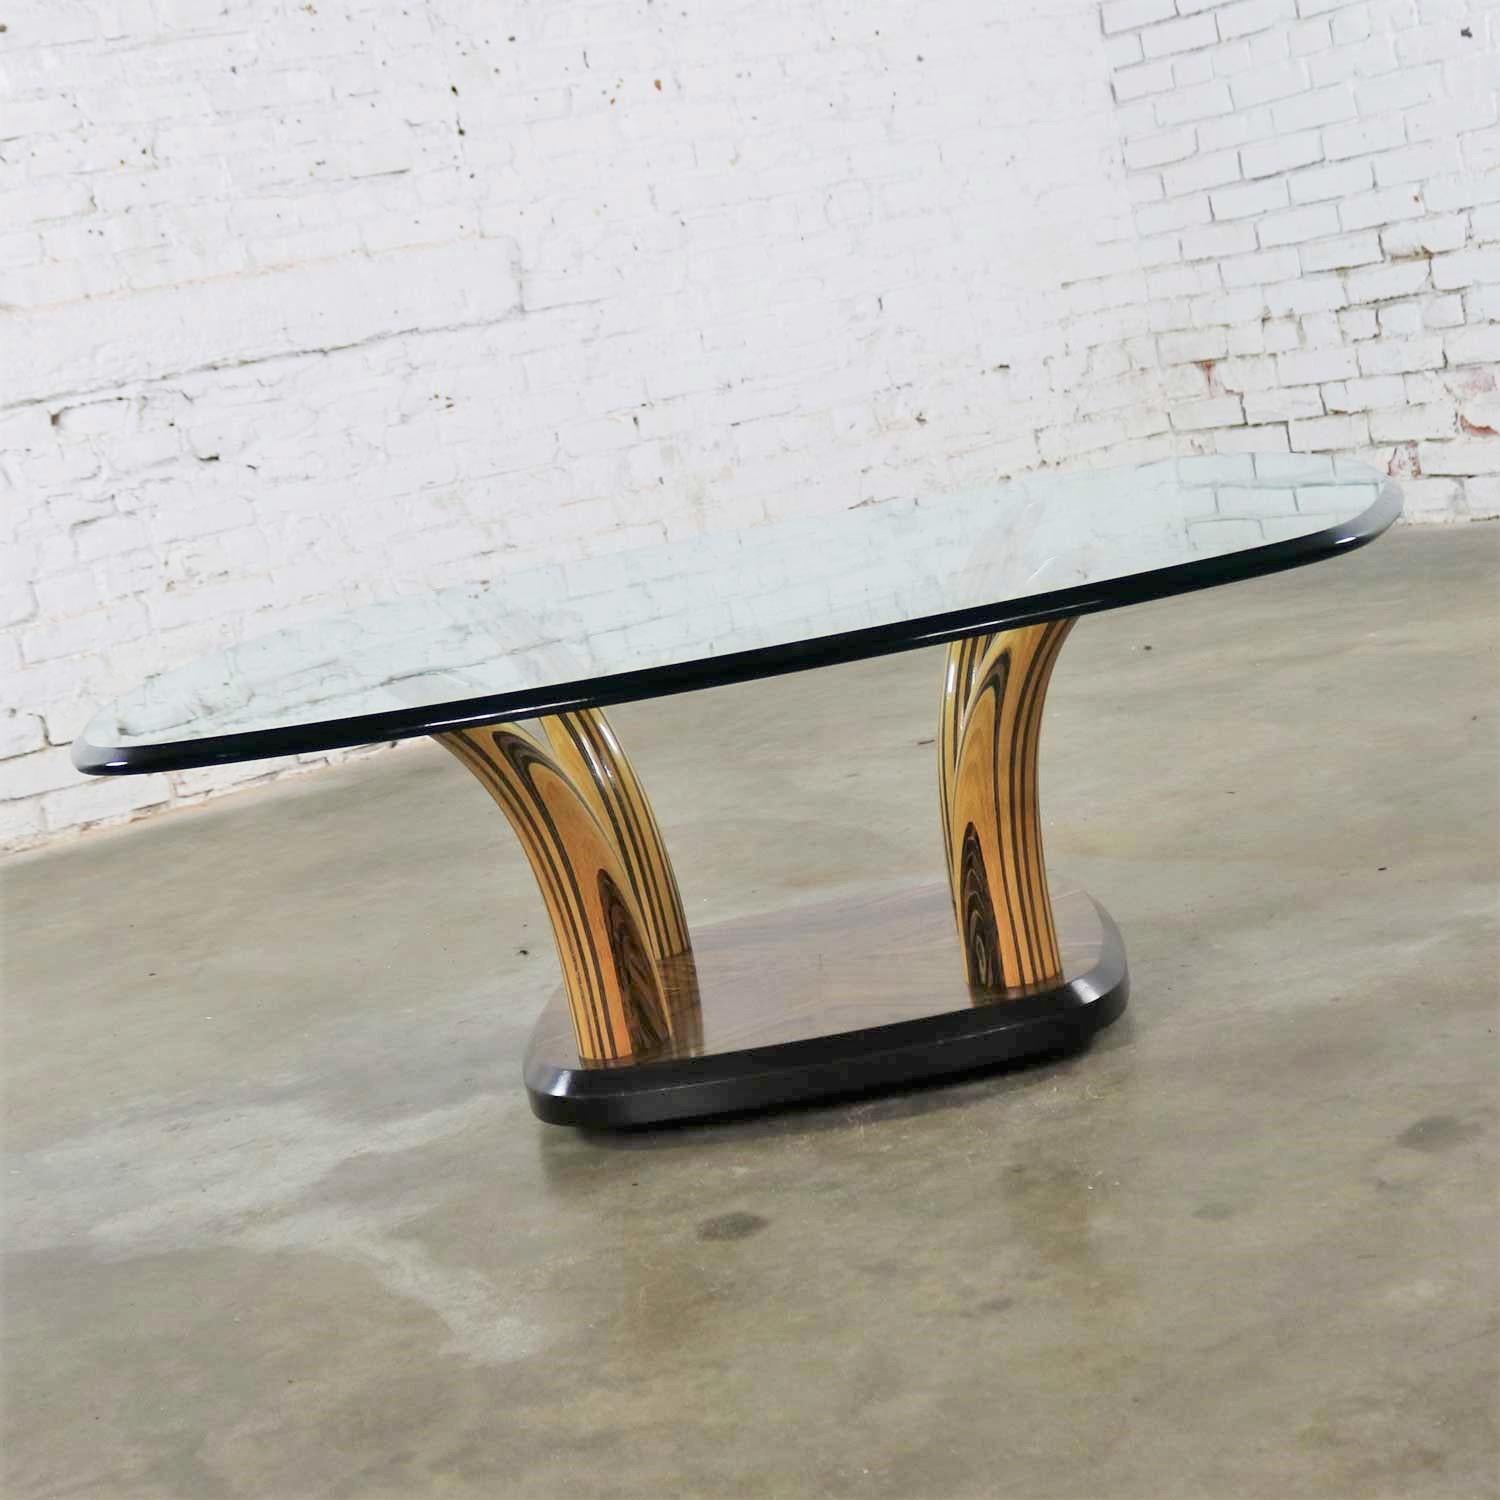 20th Century Henredon Zebra Wood Faux Tusk Coffee or Cocktail Table with Glass Top